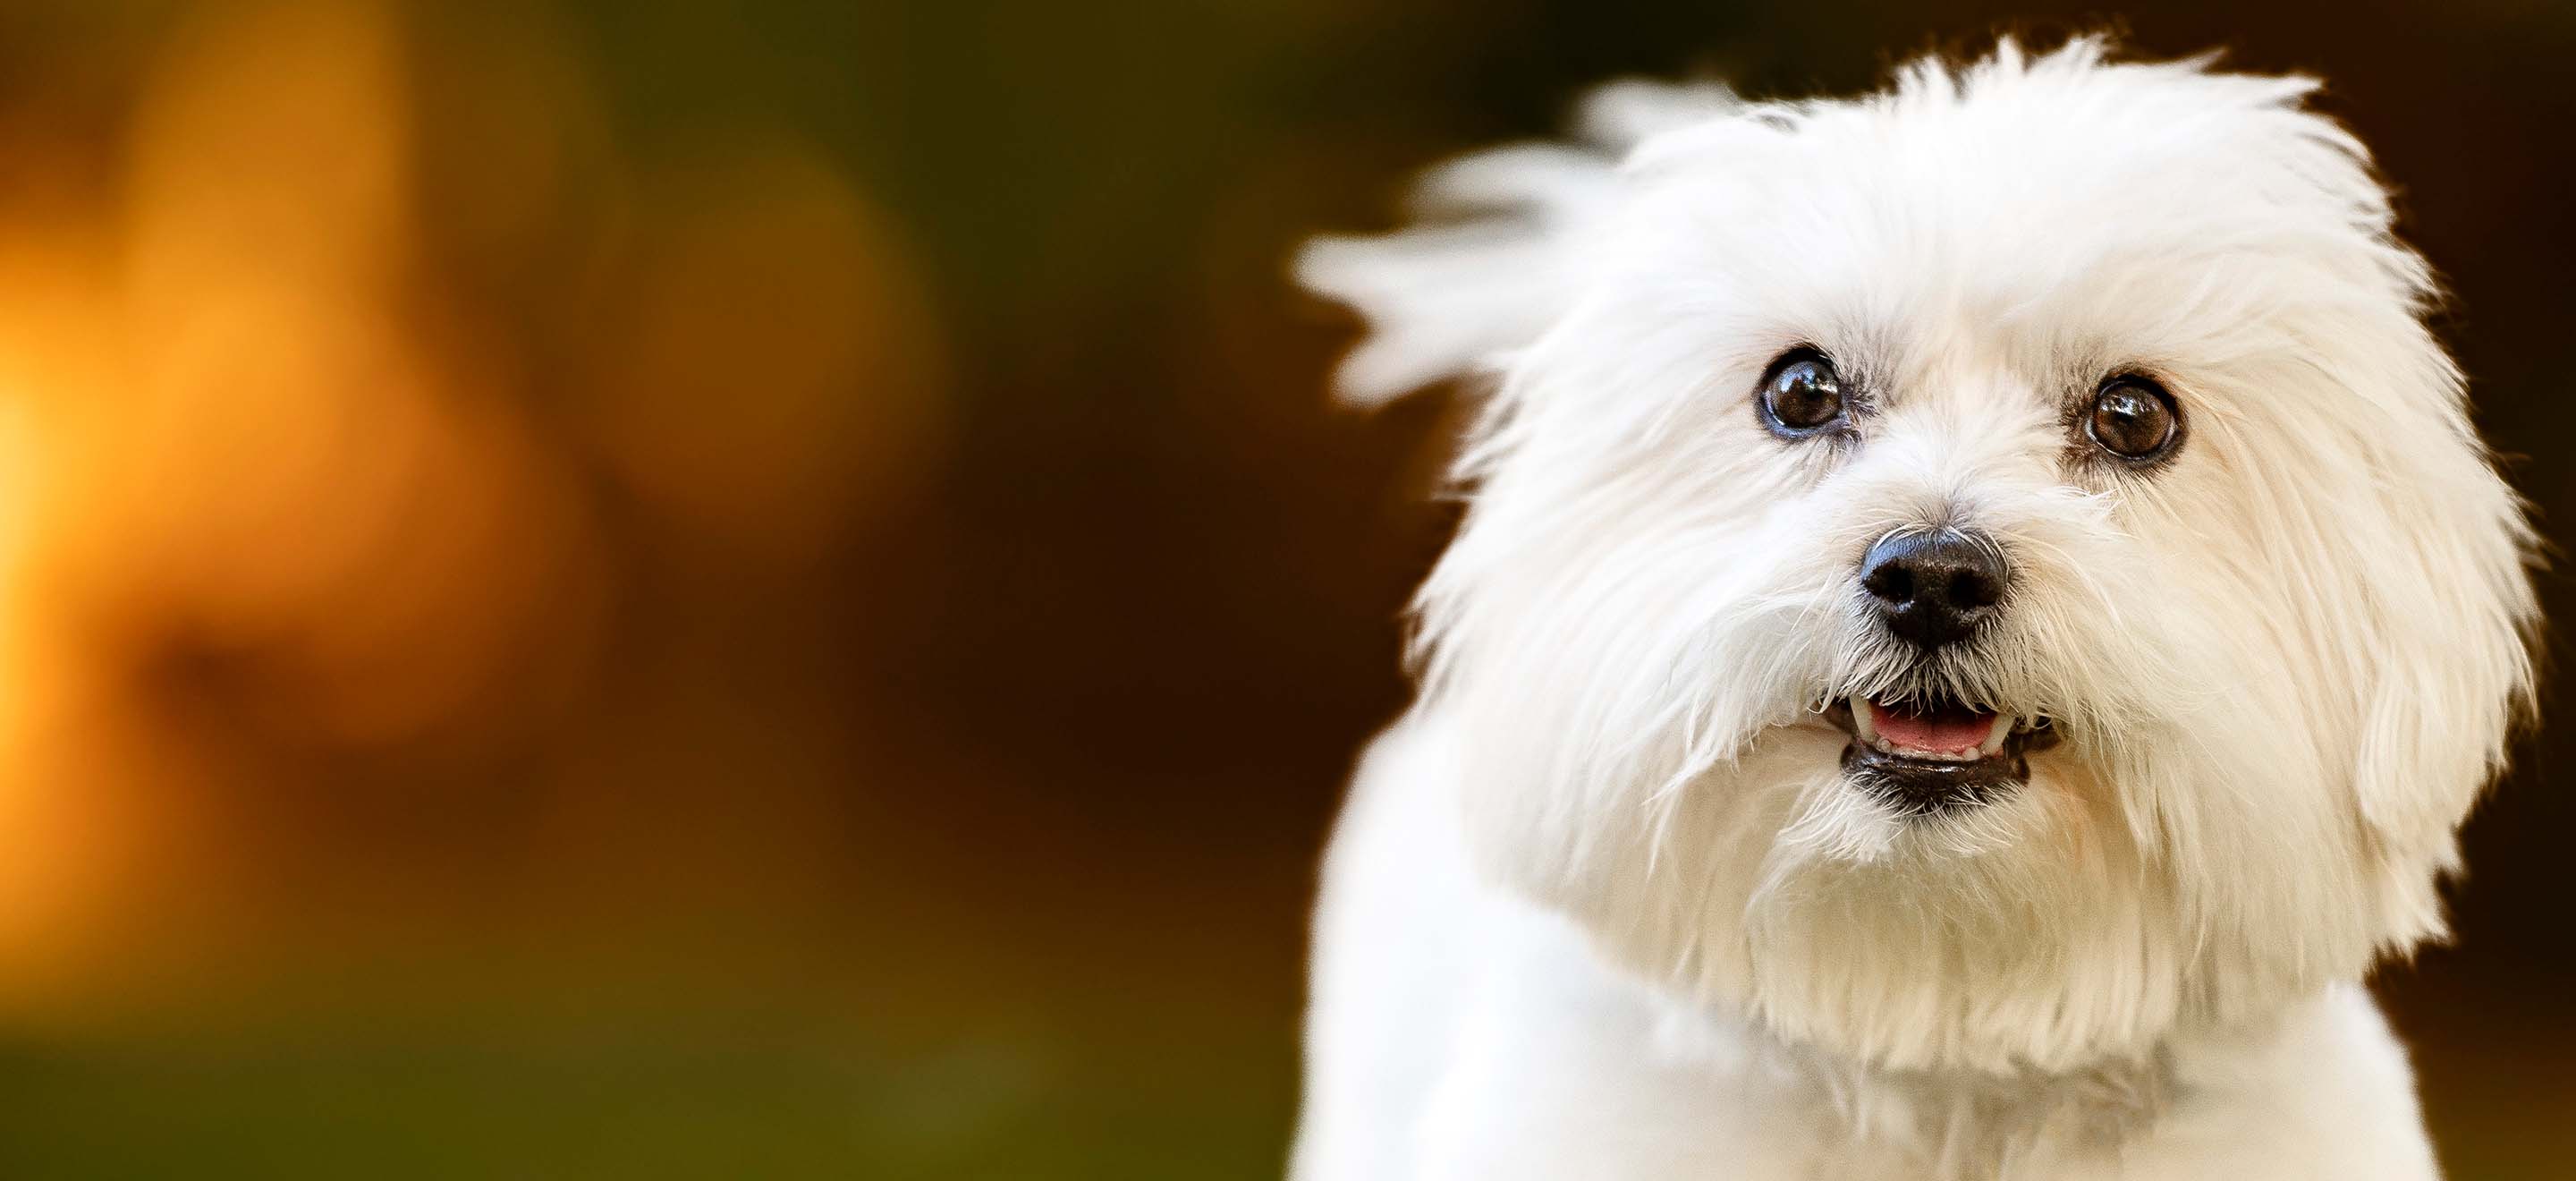 A white Lhasa Apso dog standing in park in Autumn image